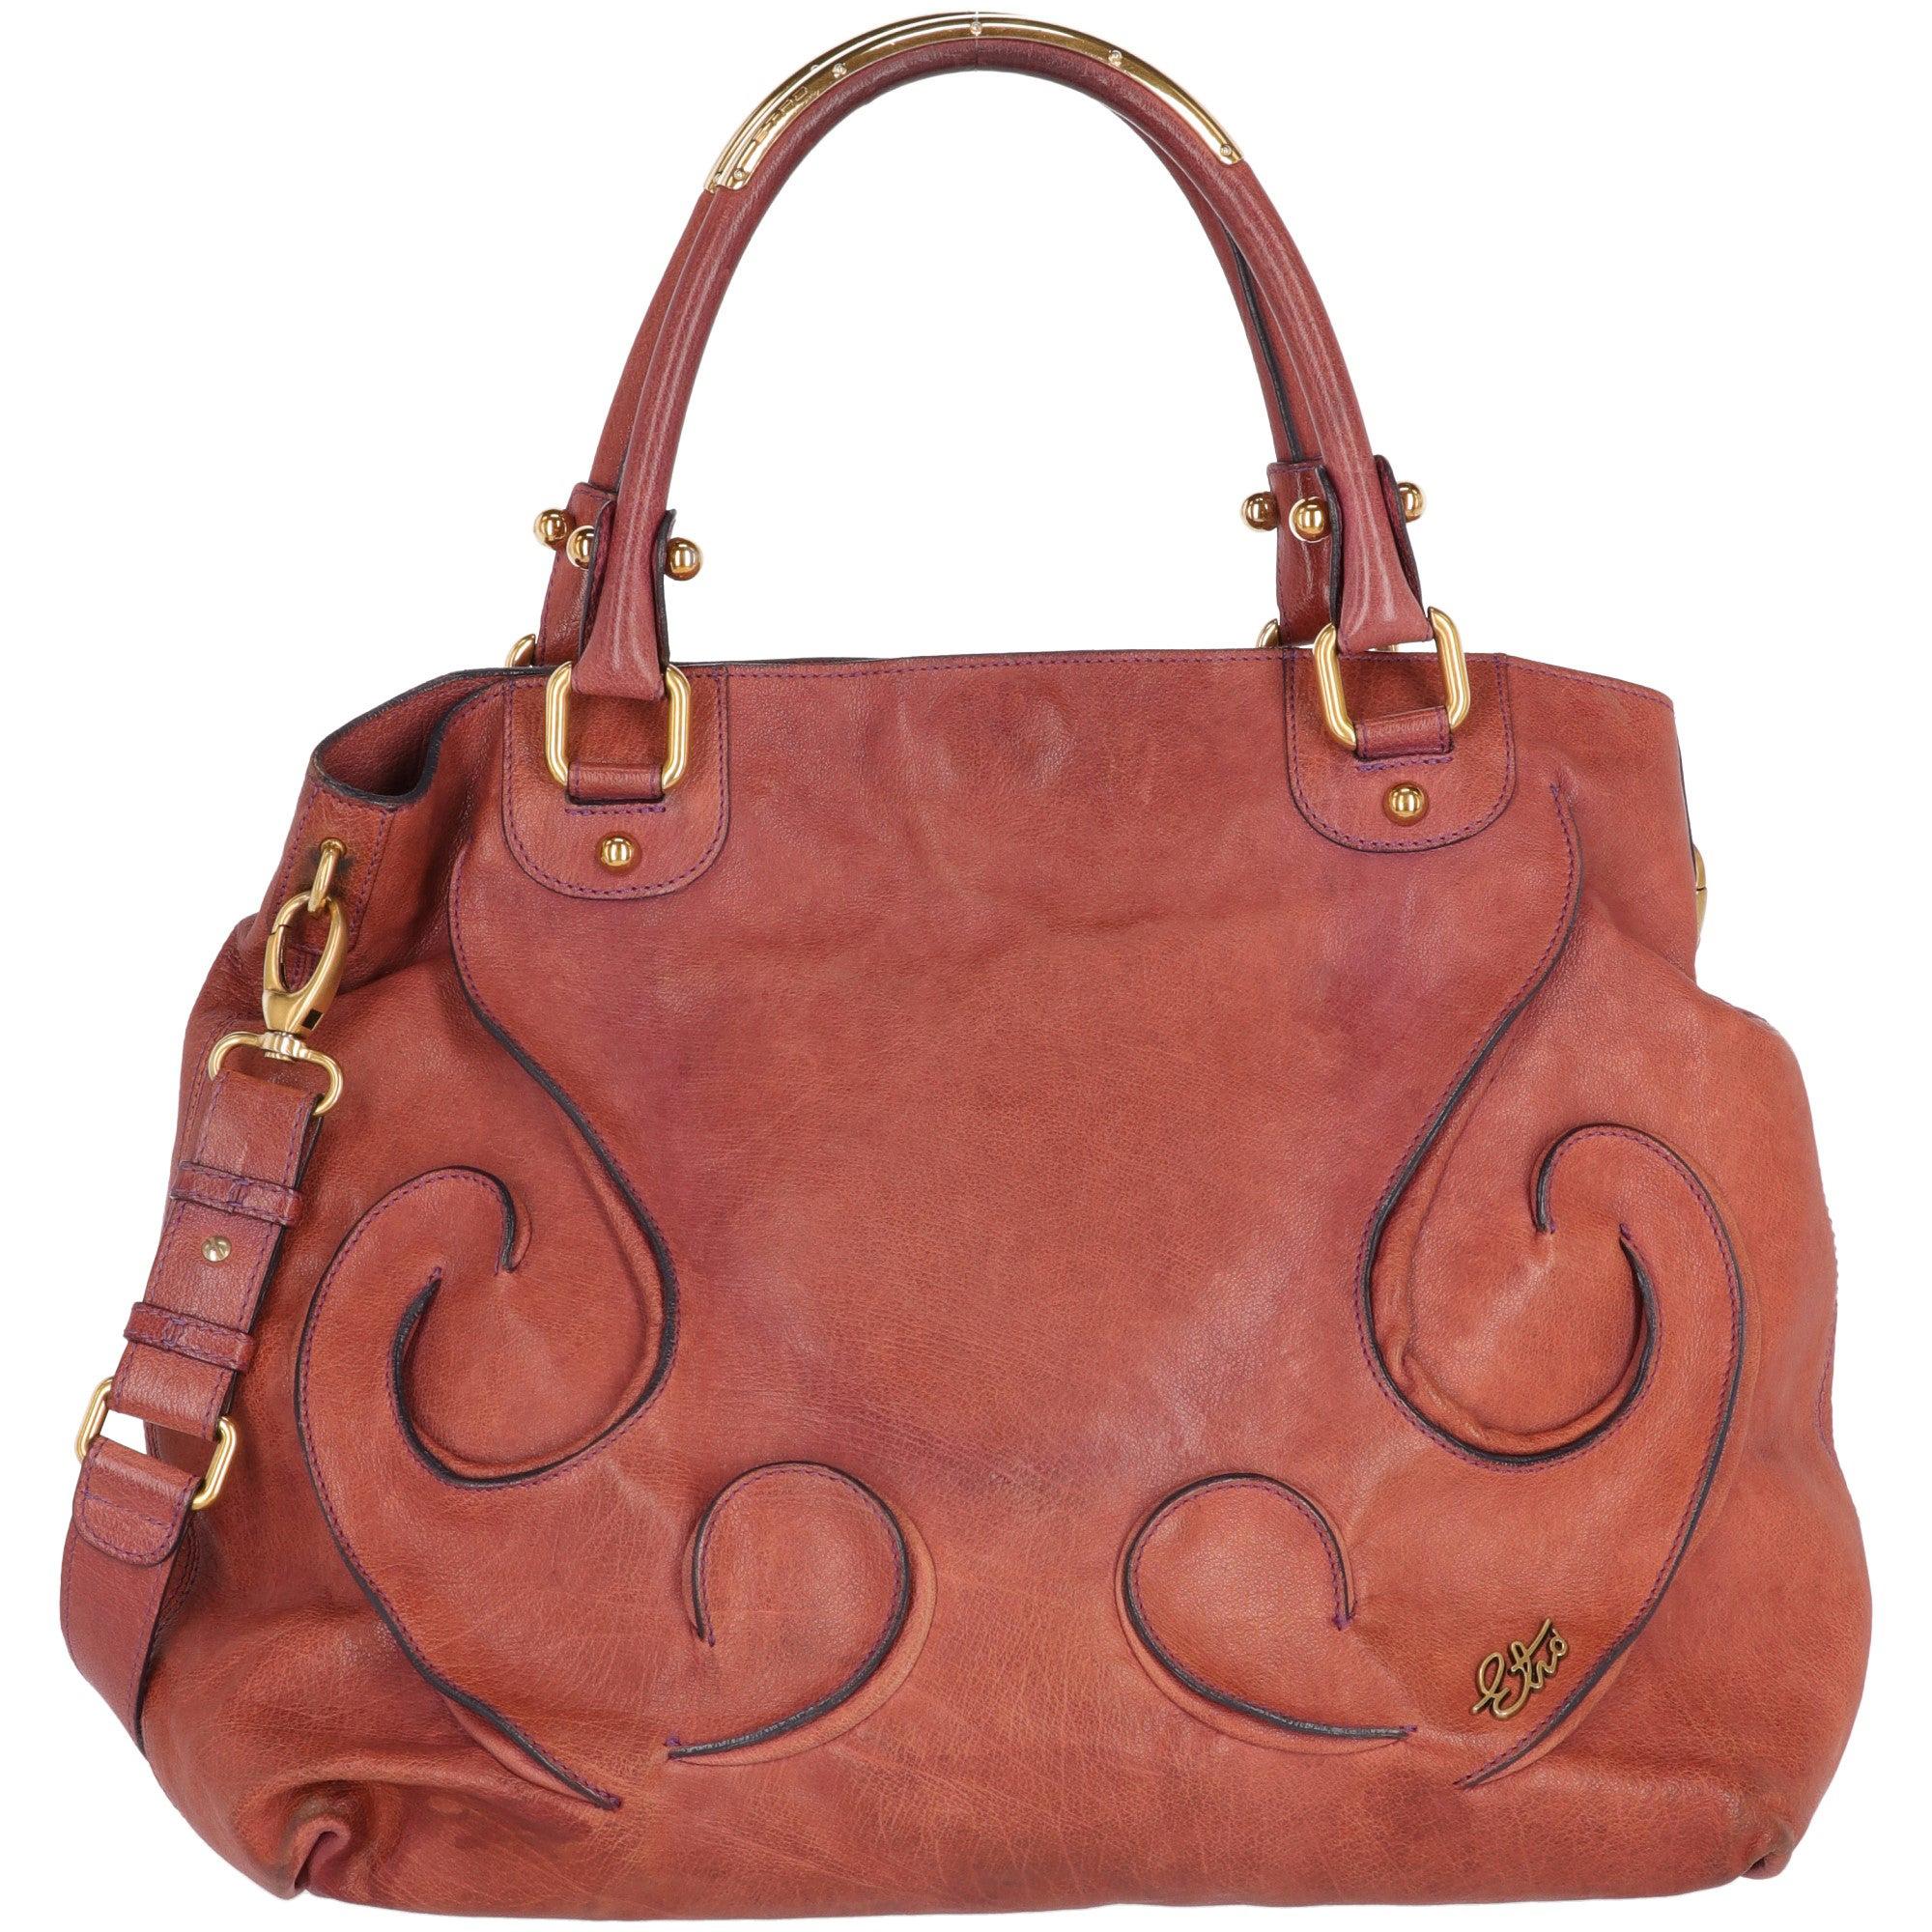 2000s Etro Rosewood Leather Tote Bag